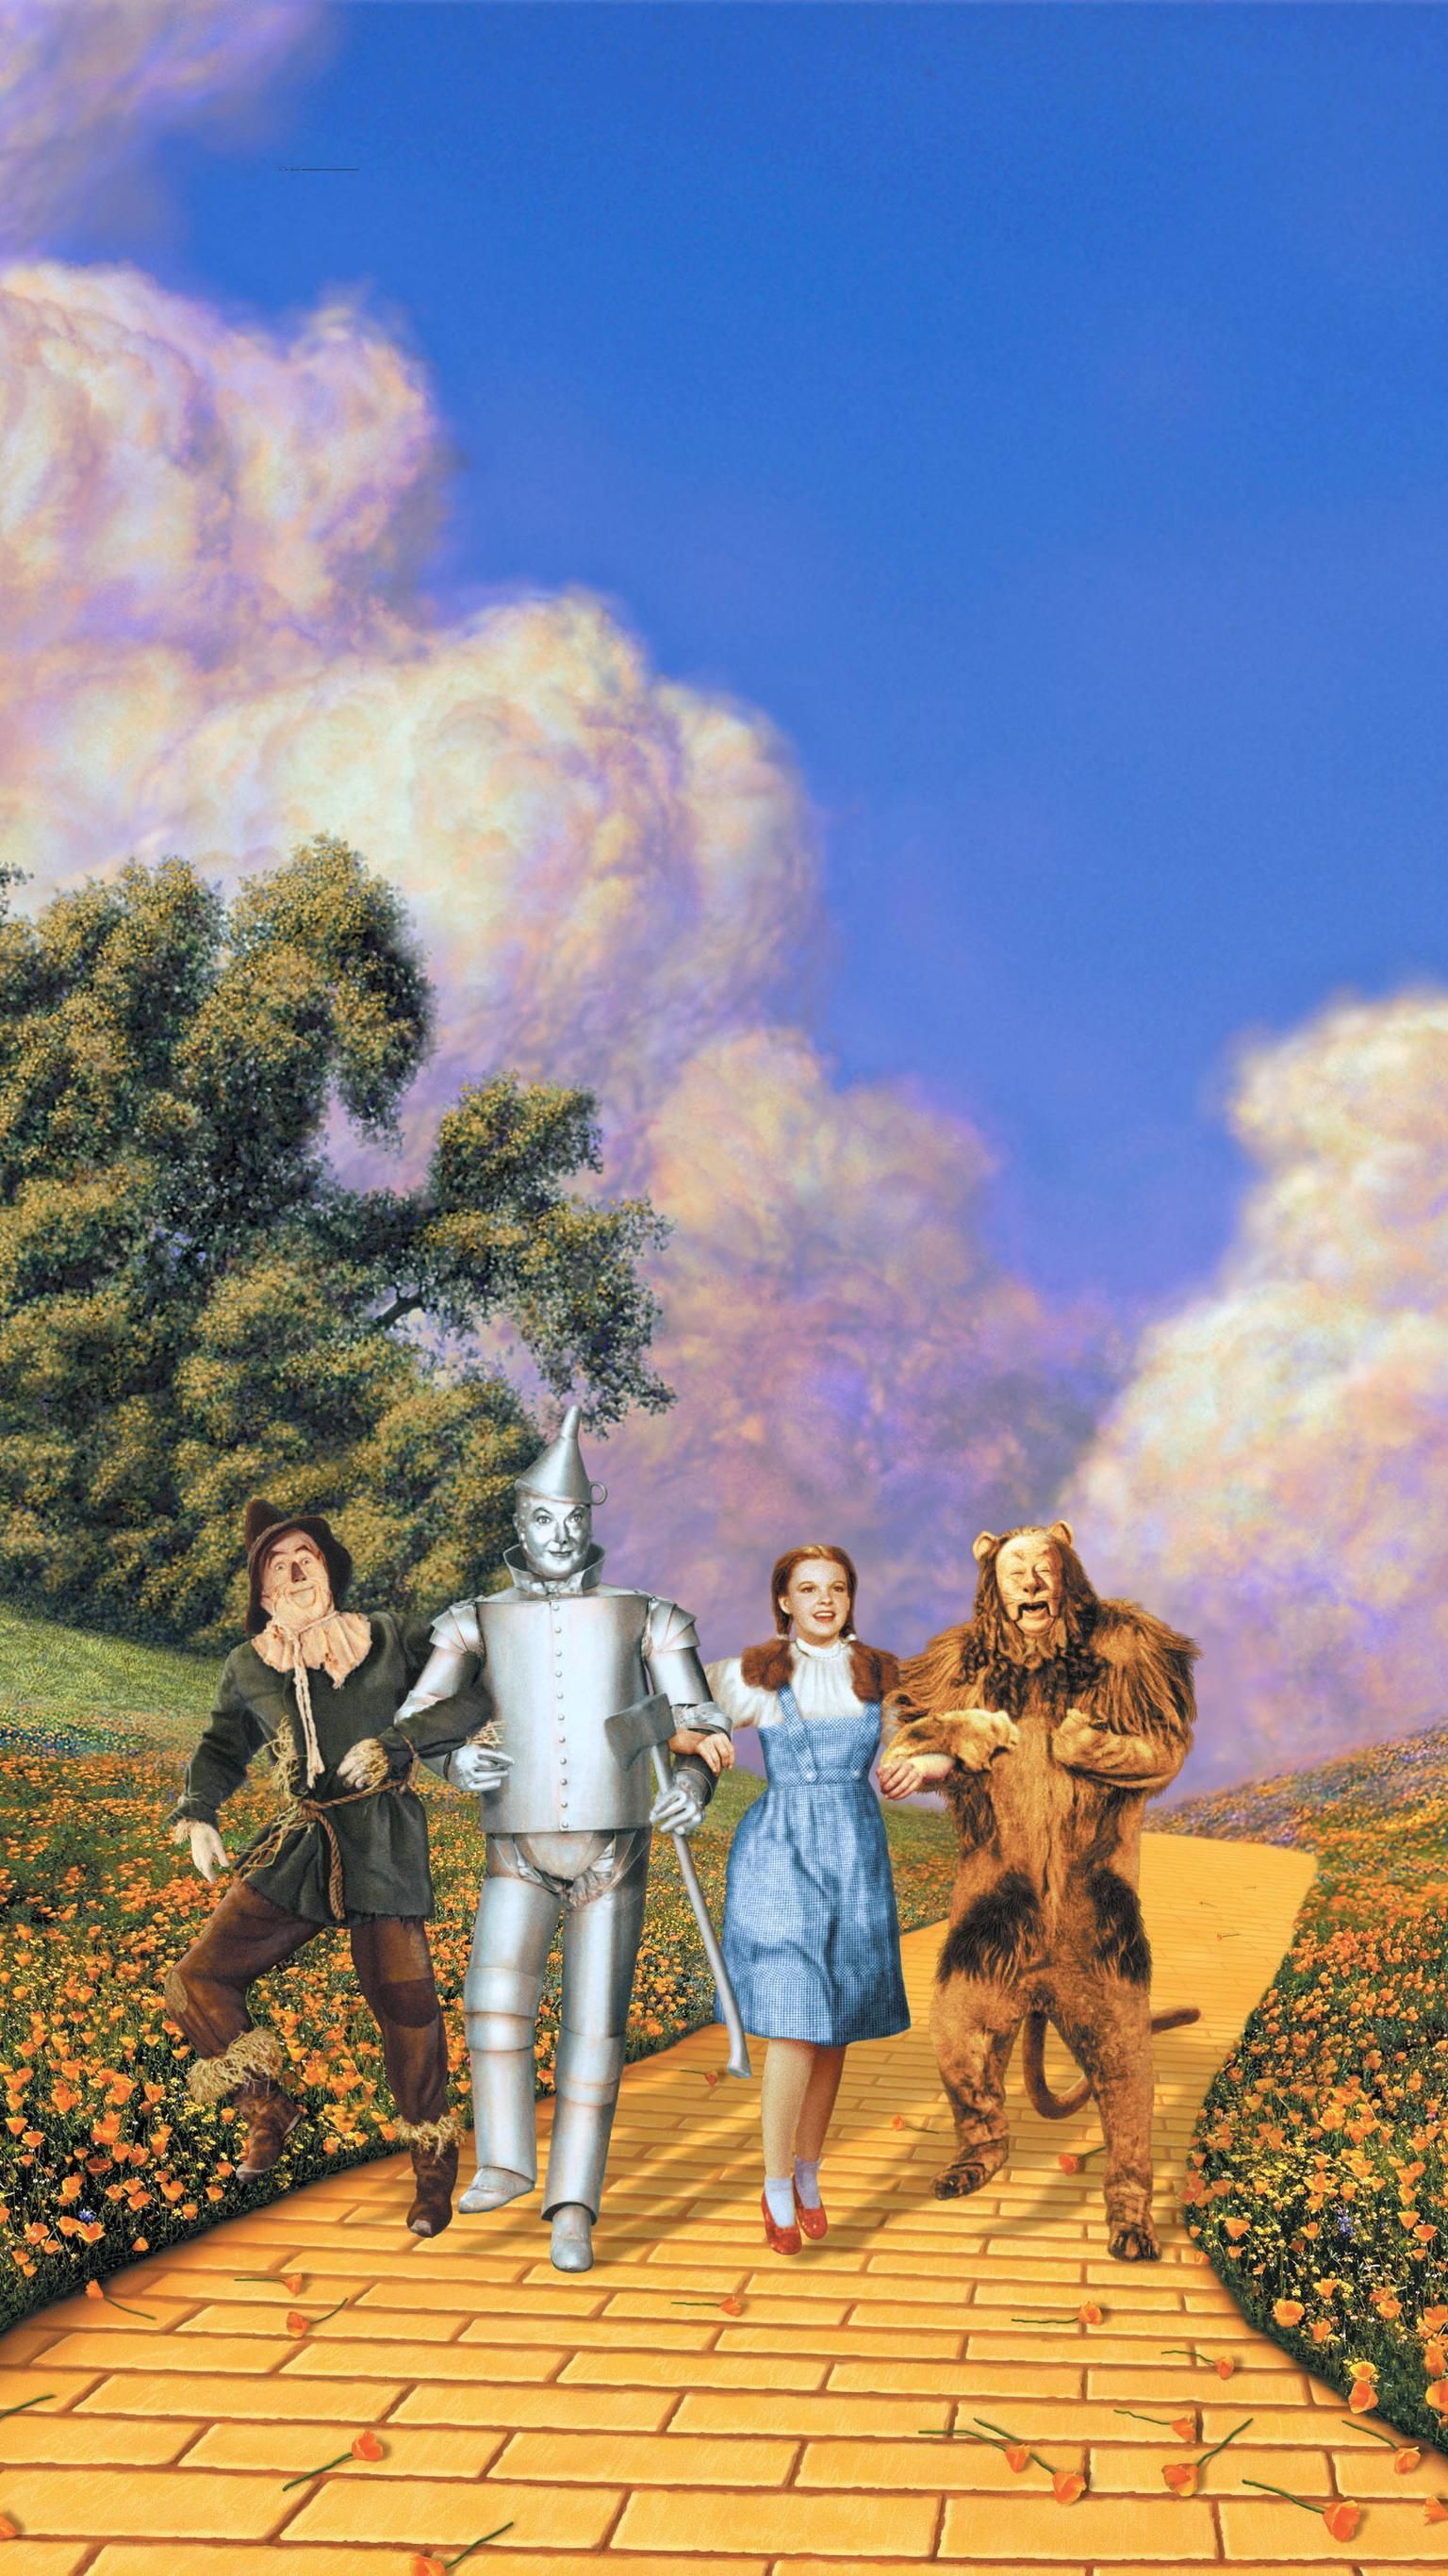 The Wizard of Oz (1939) Phone Wallpaper. Moviemania. Wizard of oz movie, Wizard of oz Wizard of oz tattoos